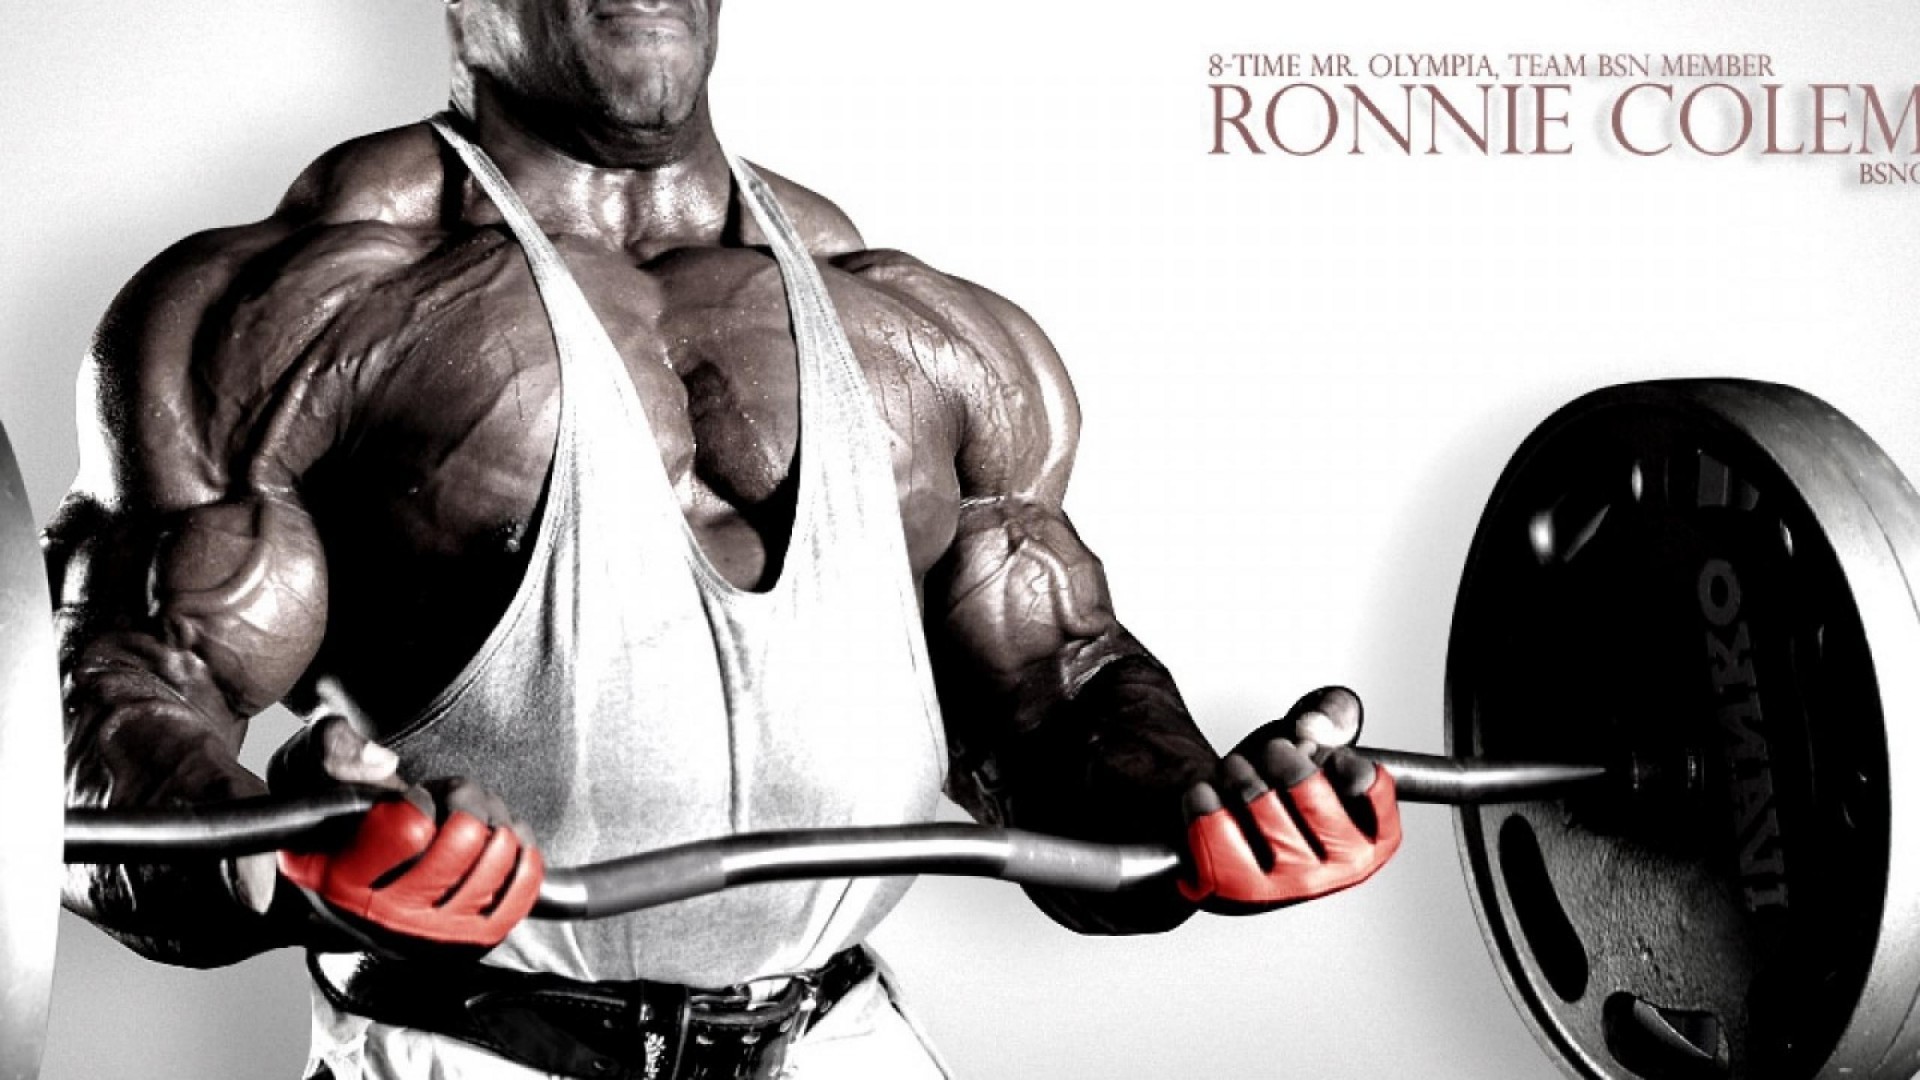 1920x1080 Ronnie Coleman 8 Time Mr Olympia wallpaper